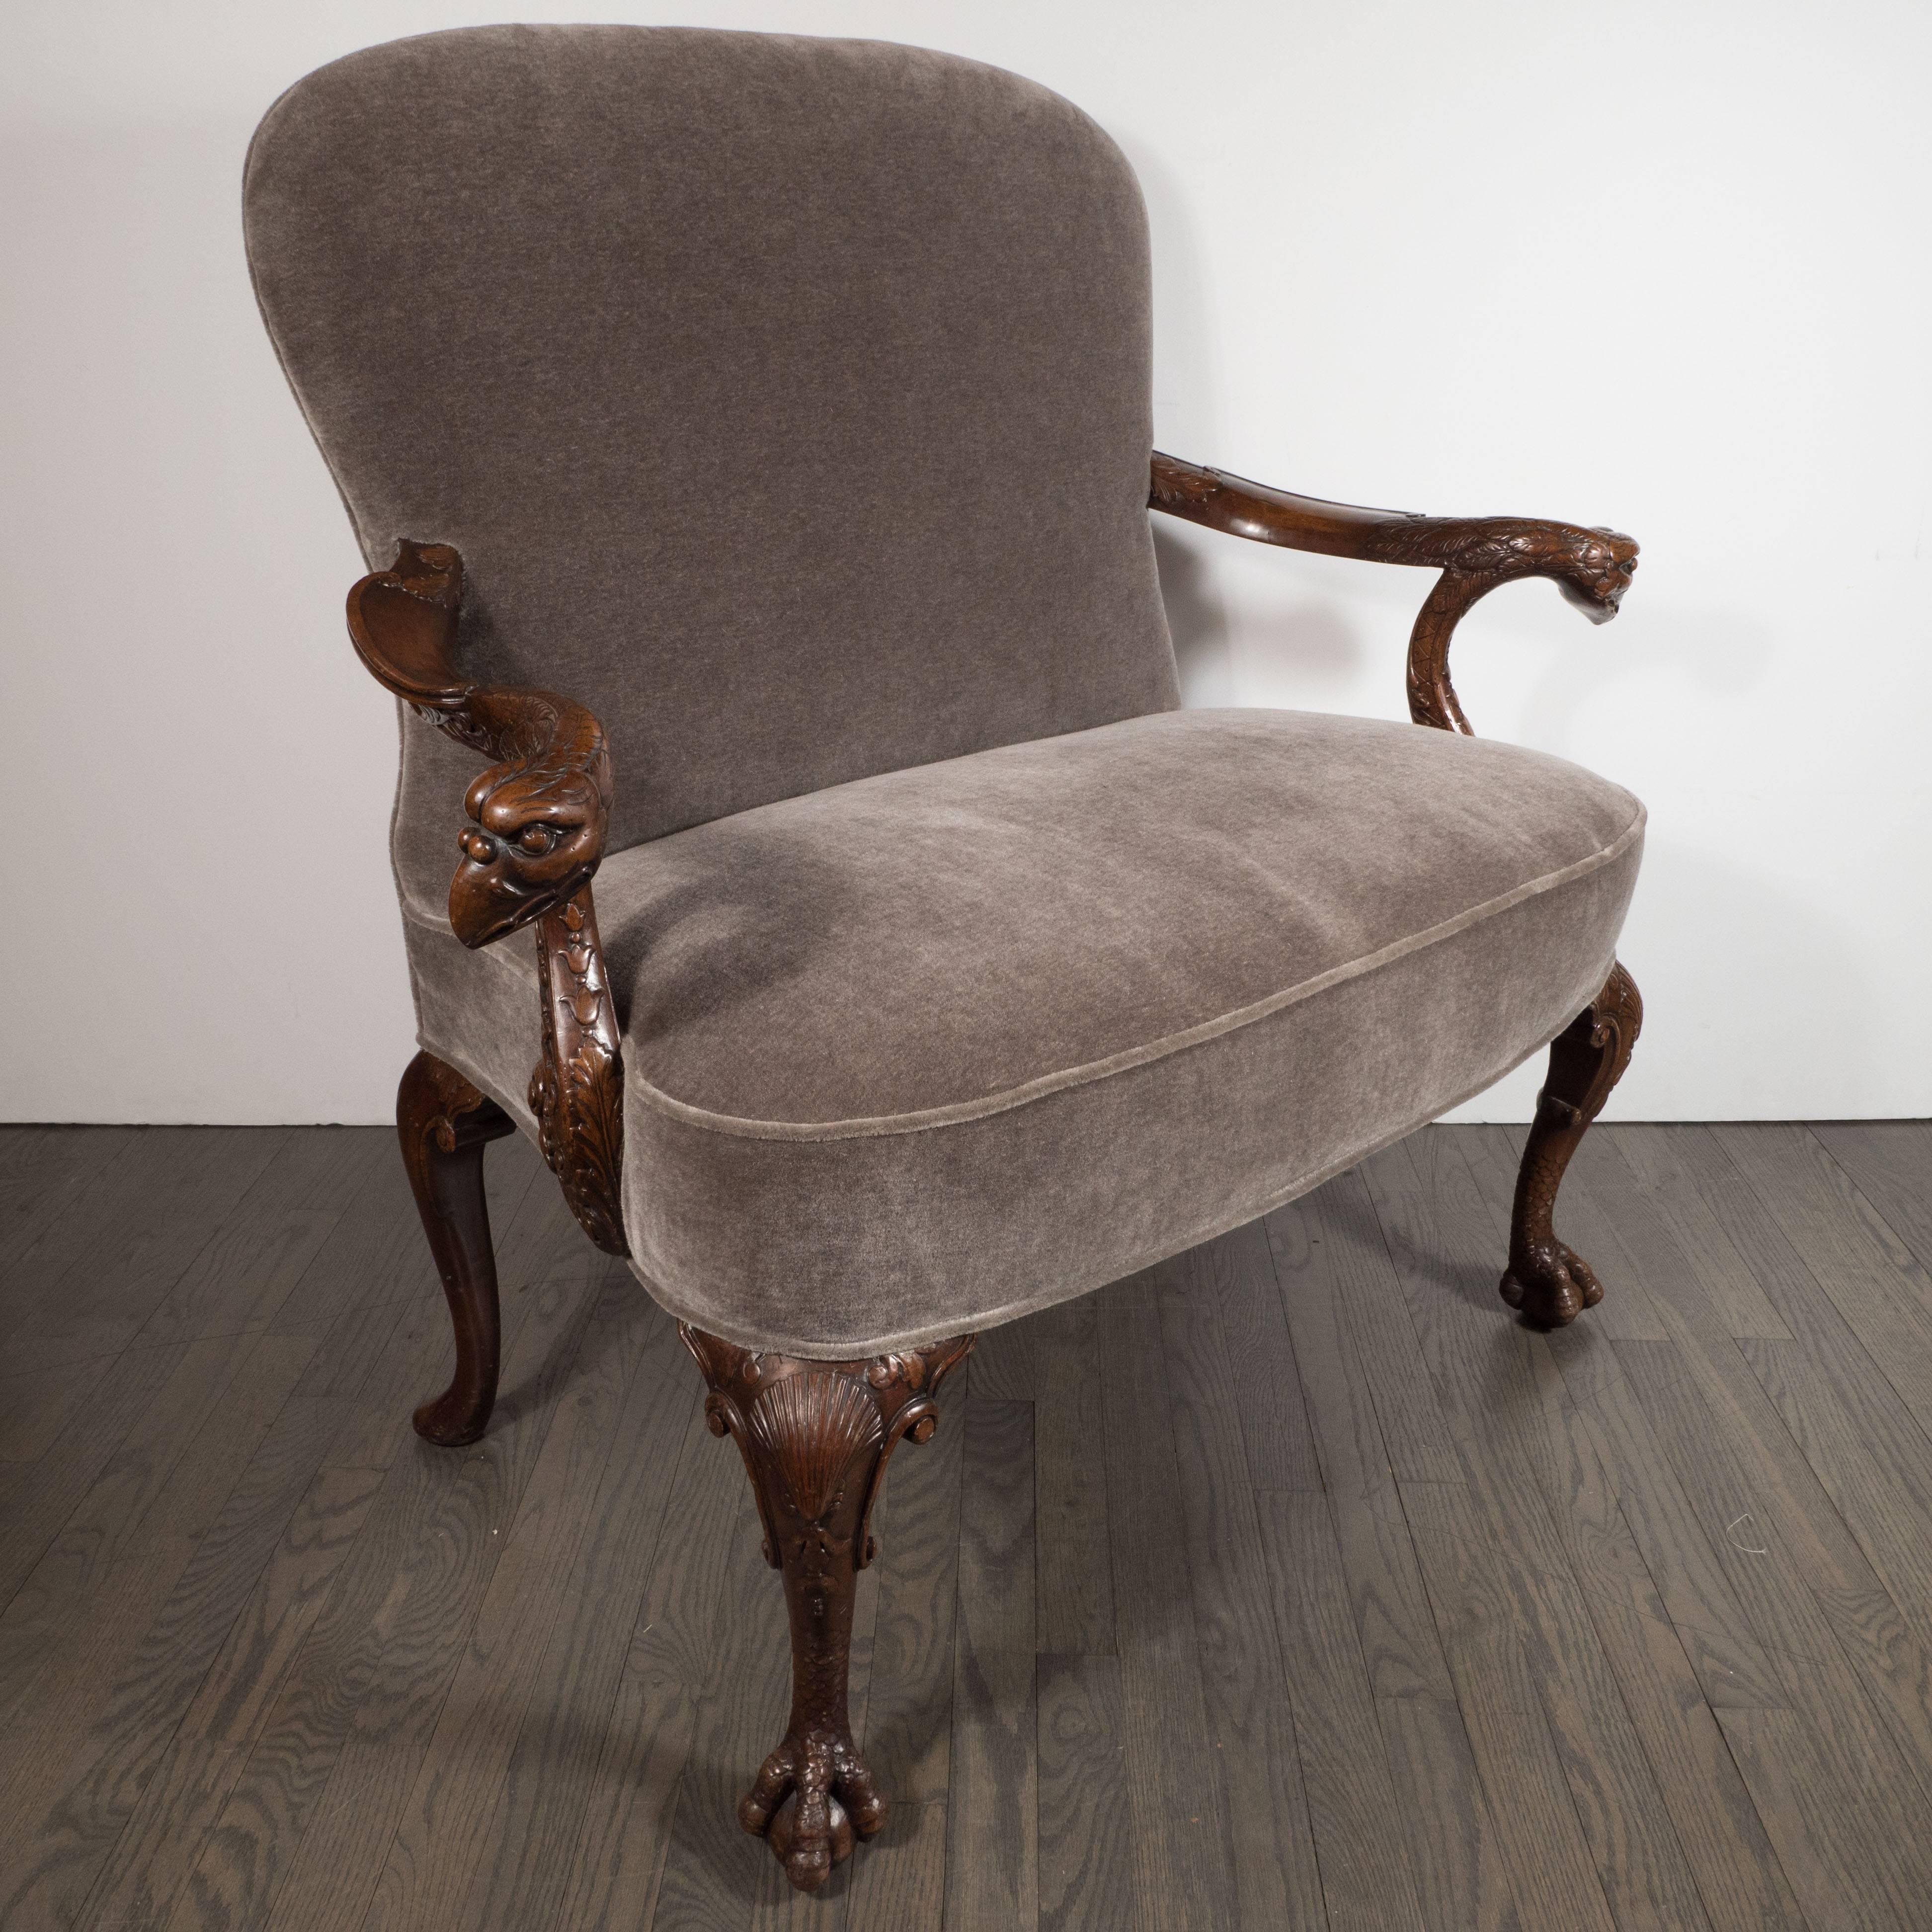 This stunning Edwardian occasional chair was realized in England at the beginning of the 20th century. It is a first-rate example of design from the time and place. It features neoclassical motifs carved throughout, including an aves motif depicting